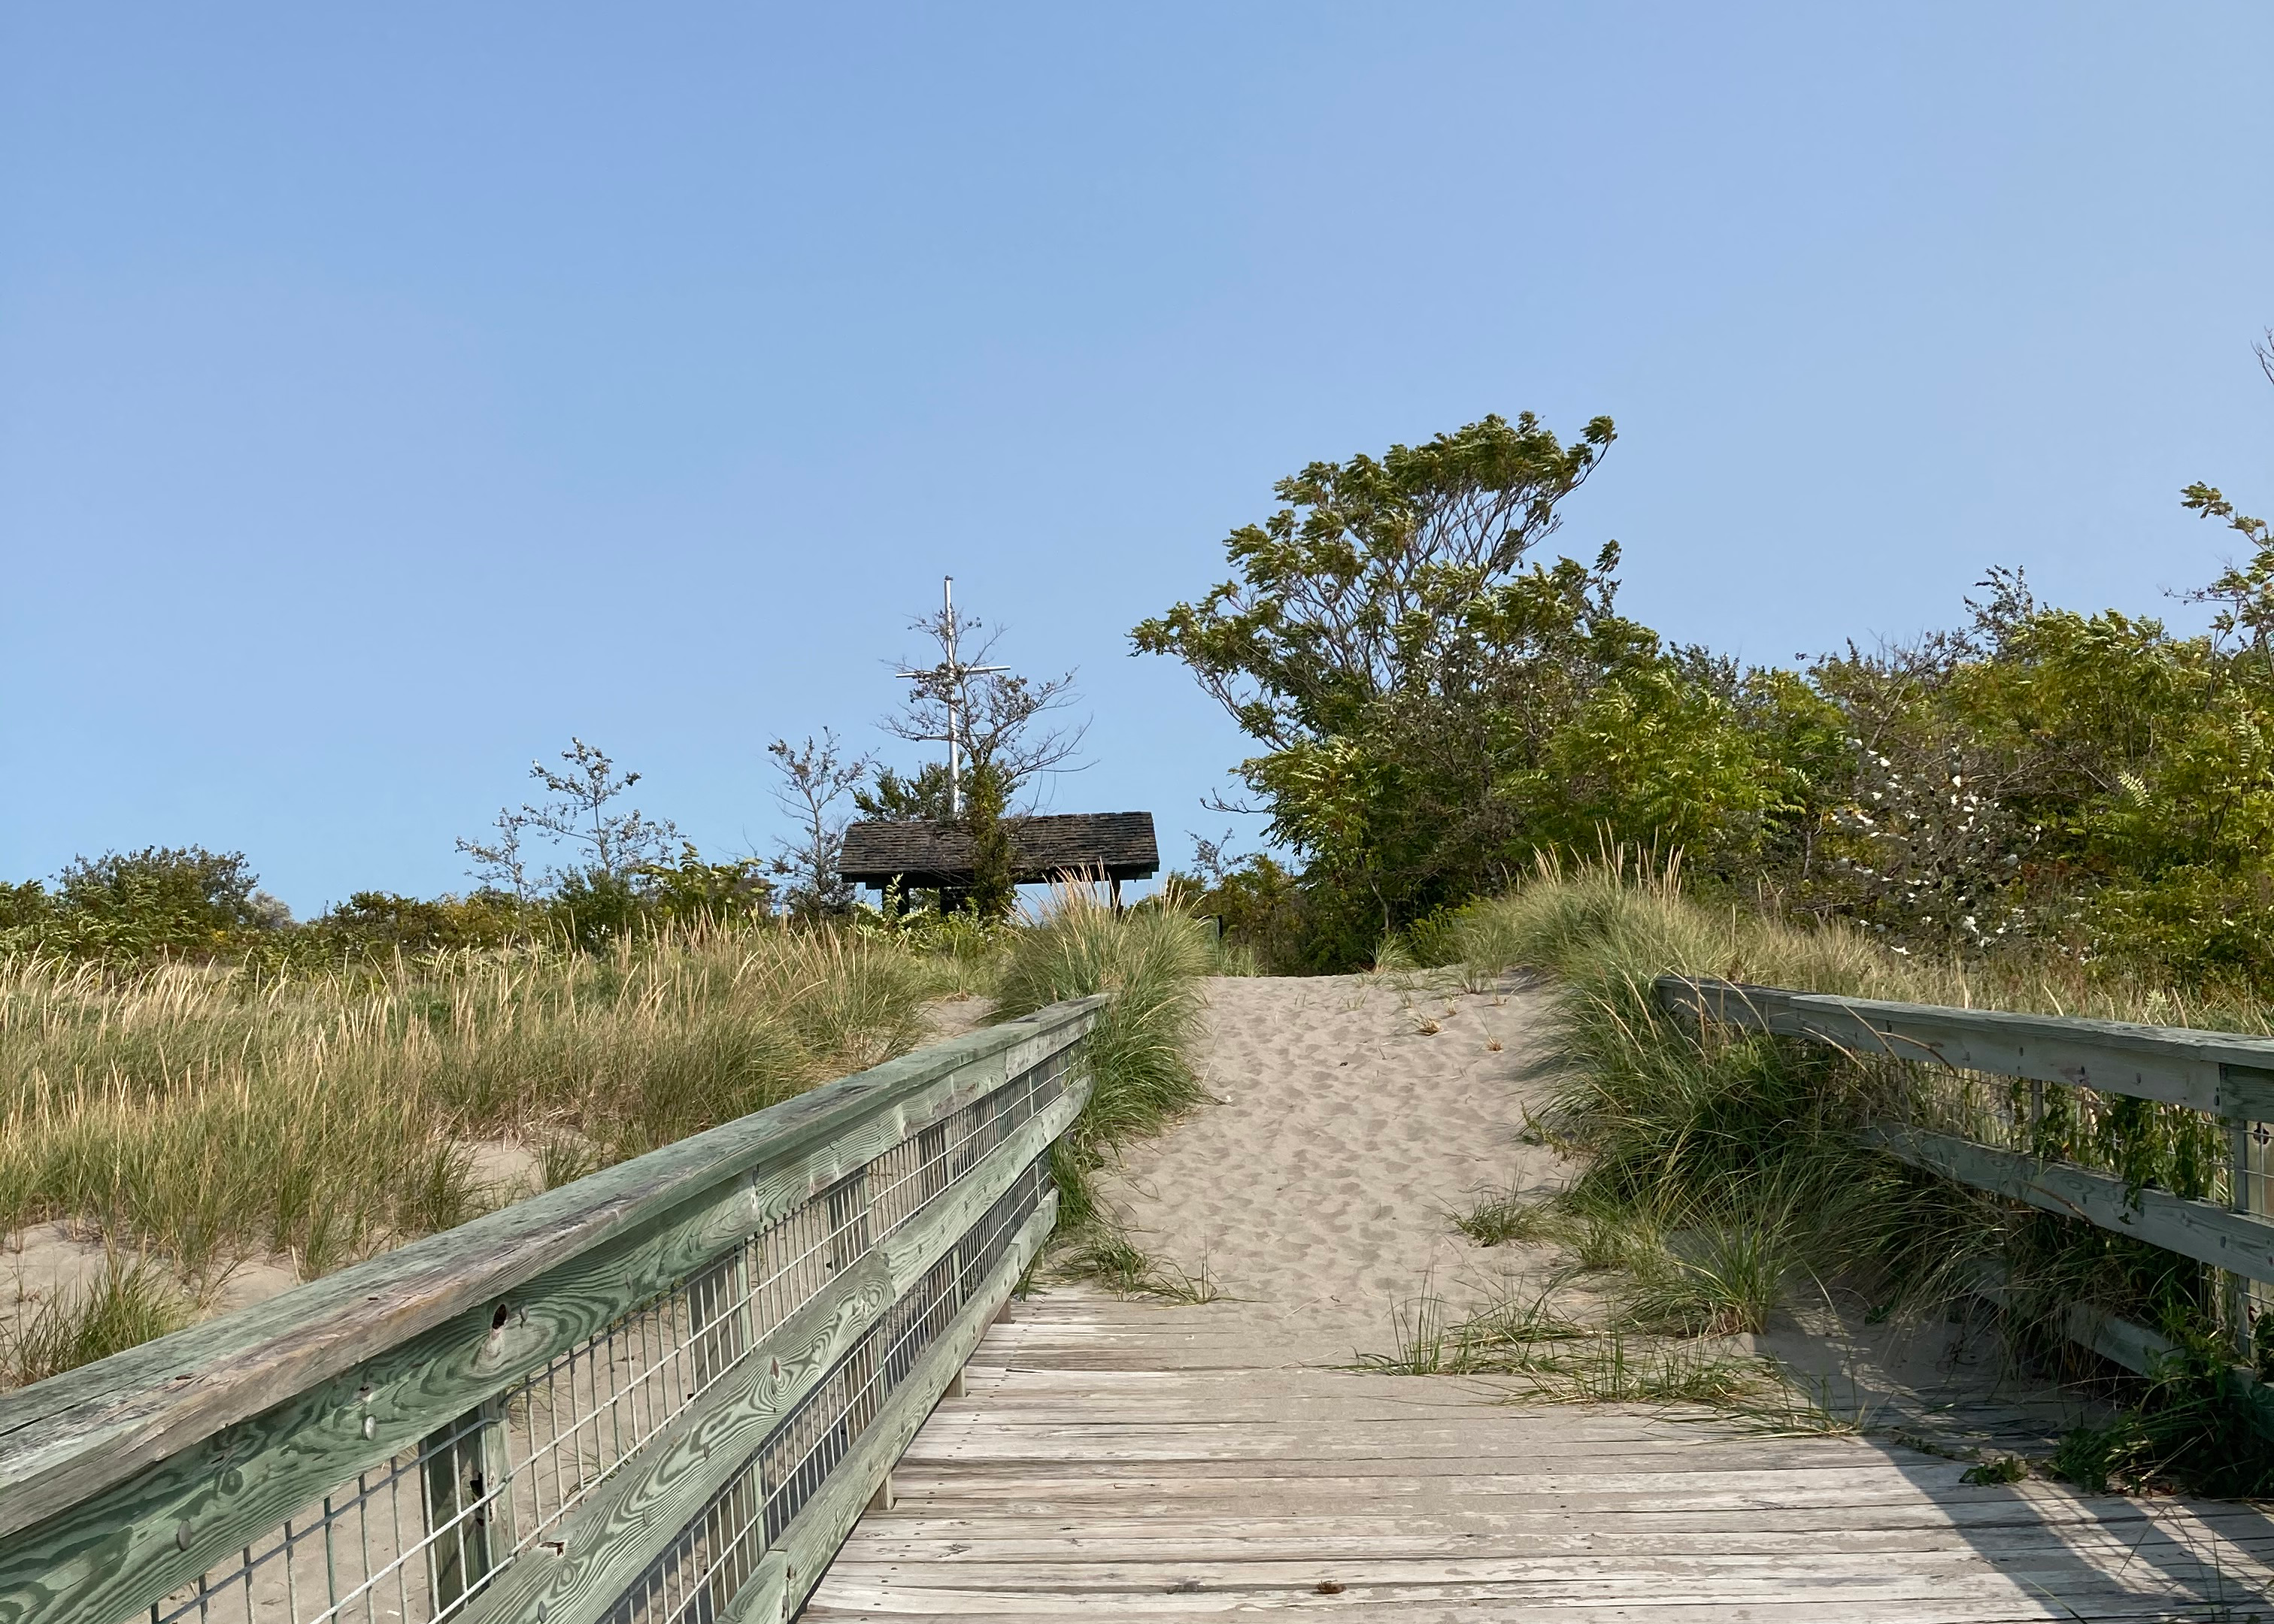 wooden dock leads to a sandy path with tall grass on either side and shrubs in the background.